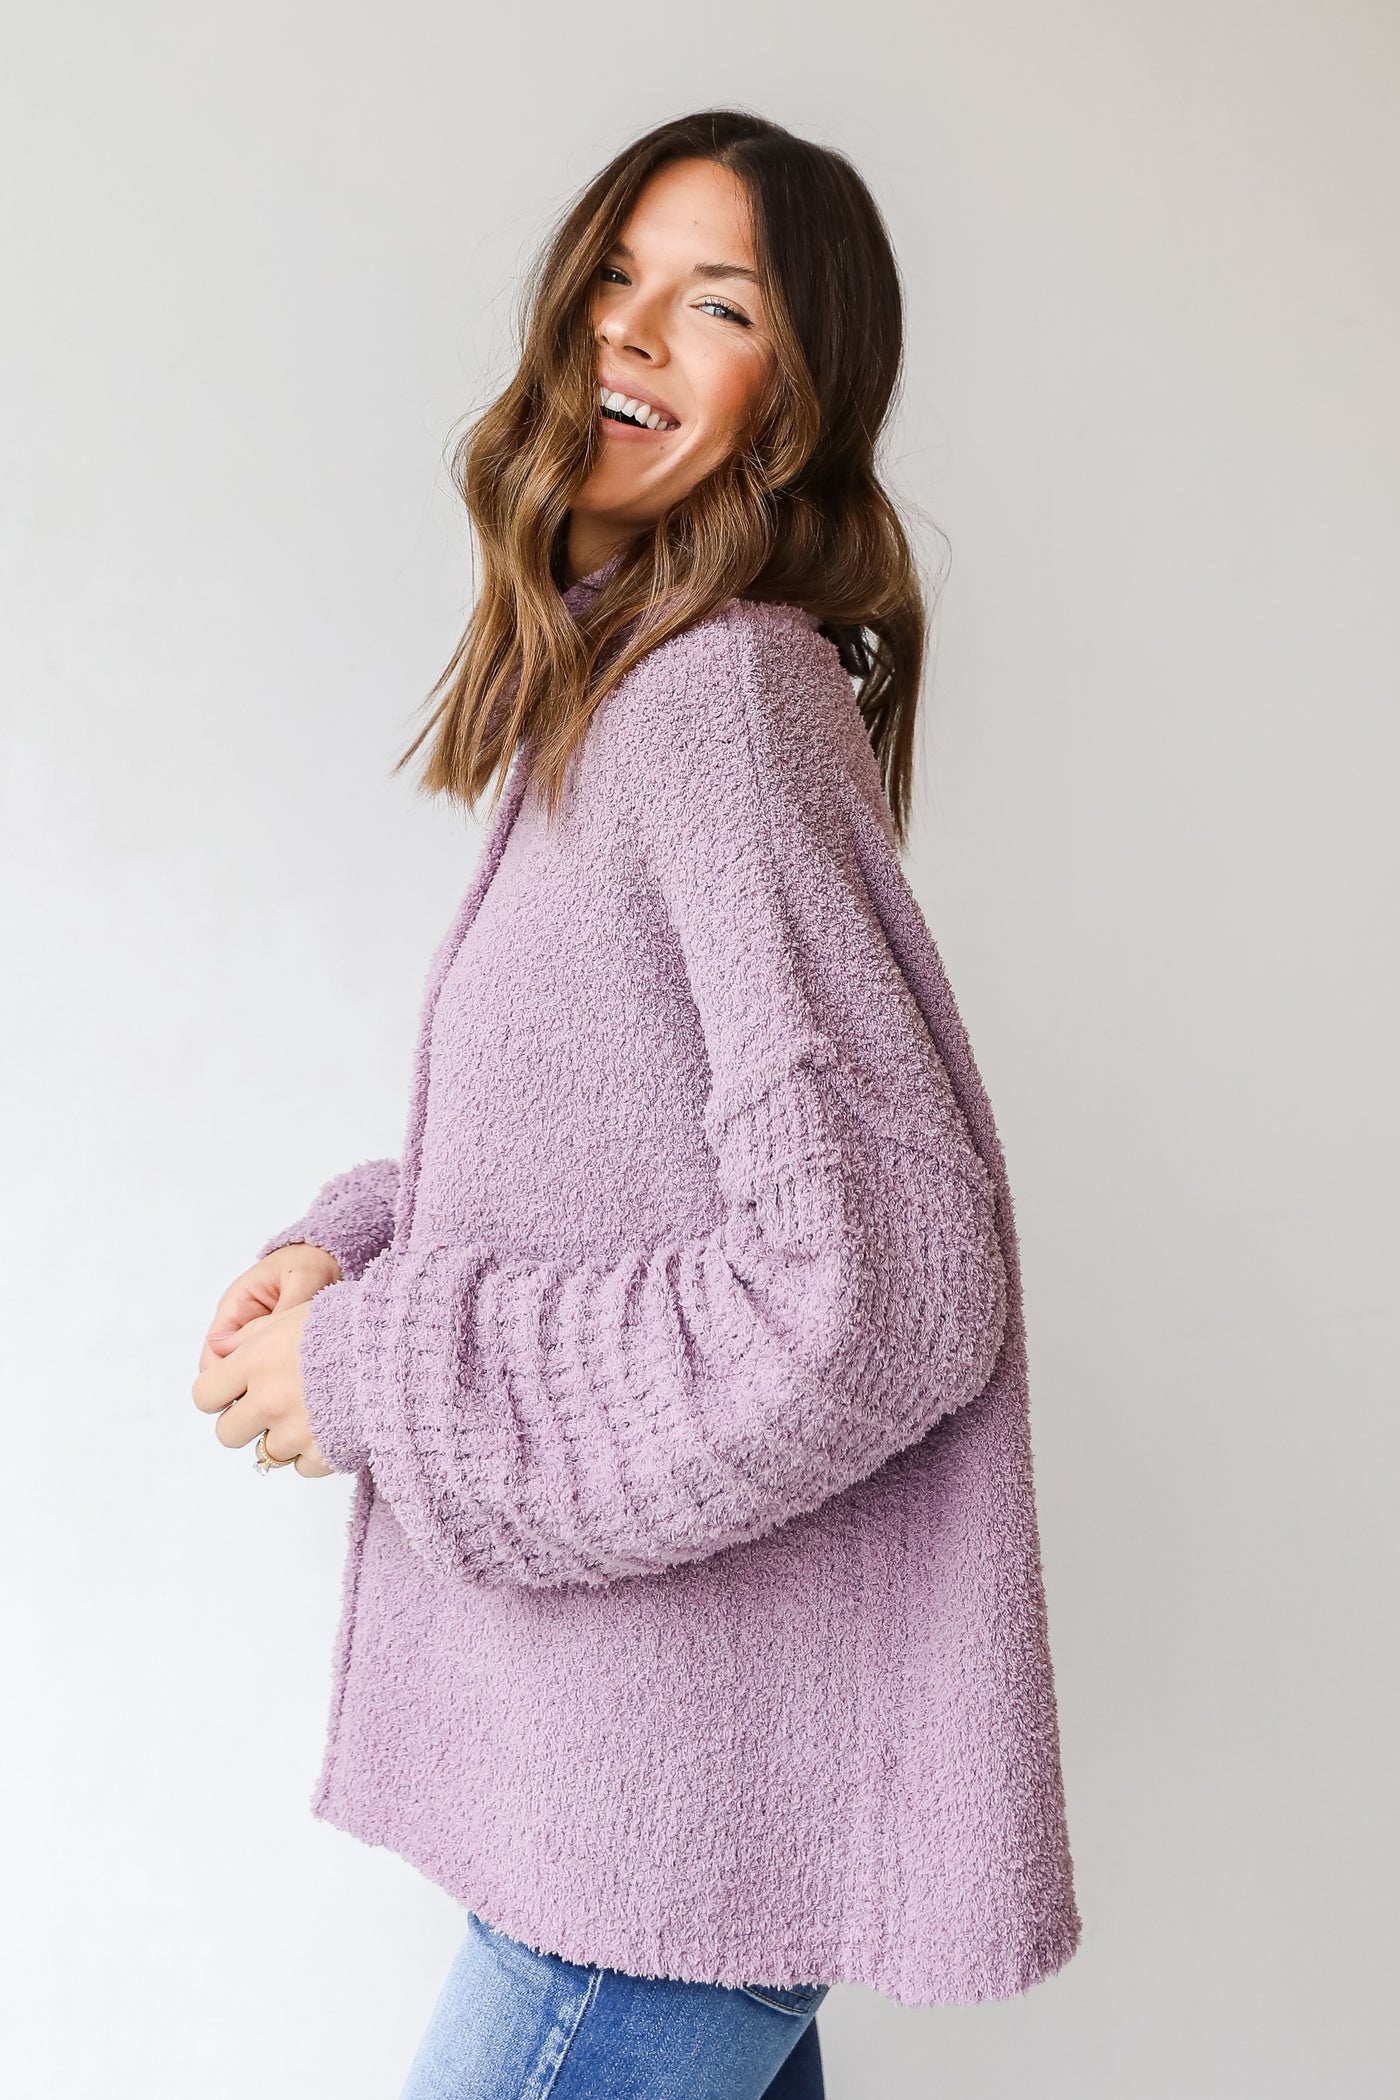 Fuzzy Knit Sweater in lilac side view